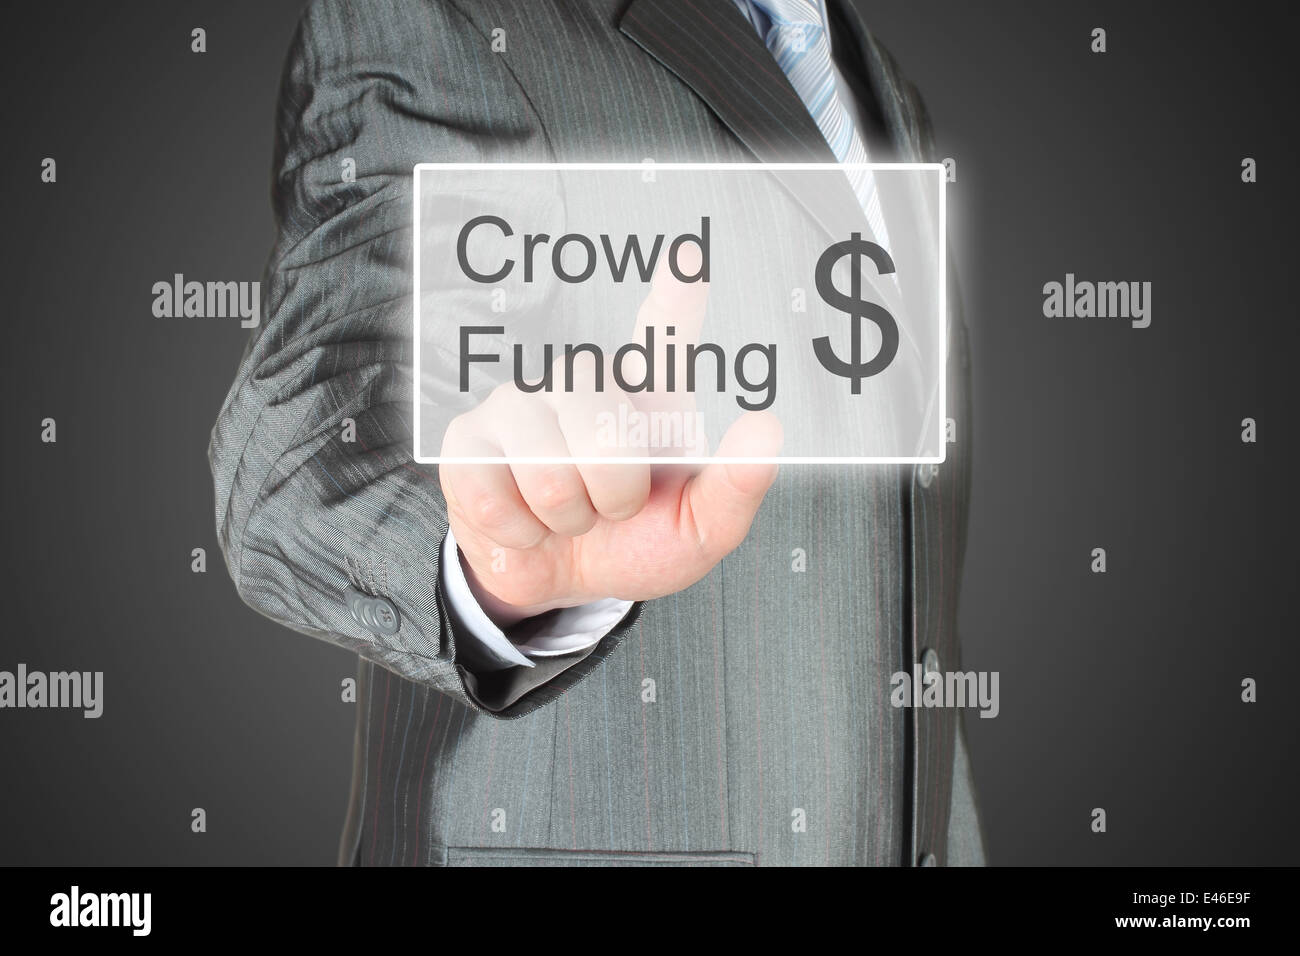 Businessman pushes virtual crowd funding button on dark background Stock Photo